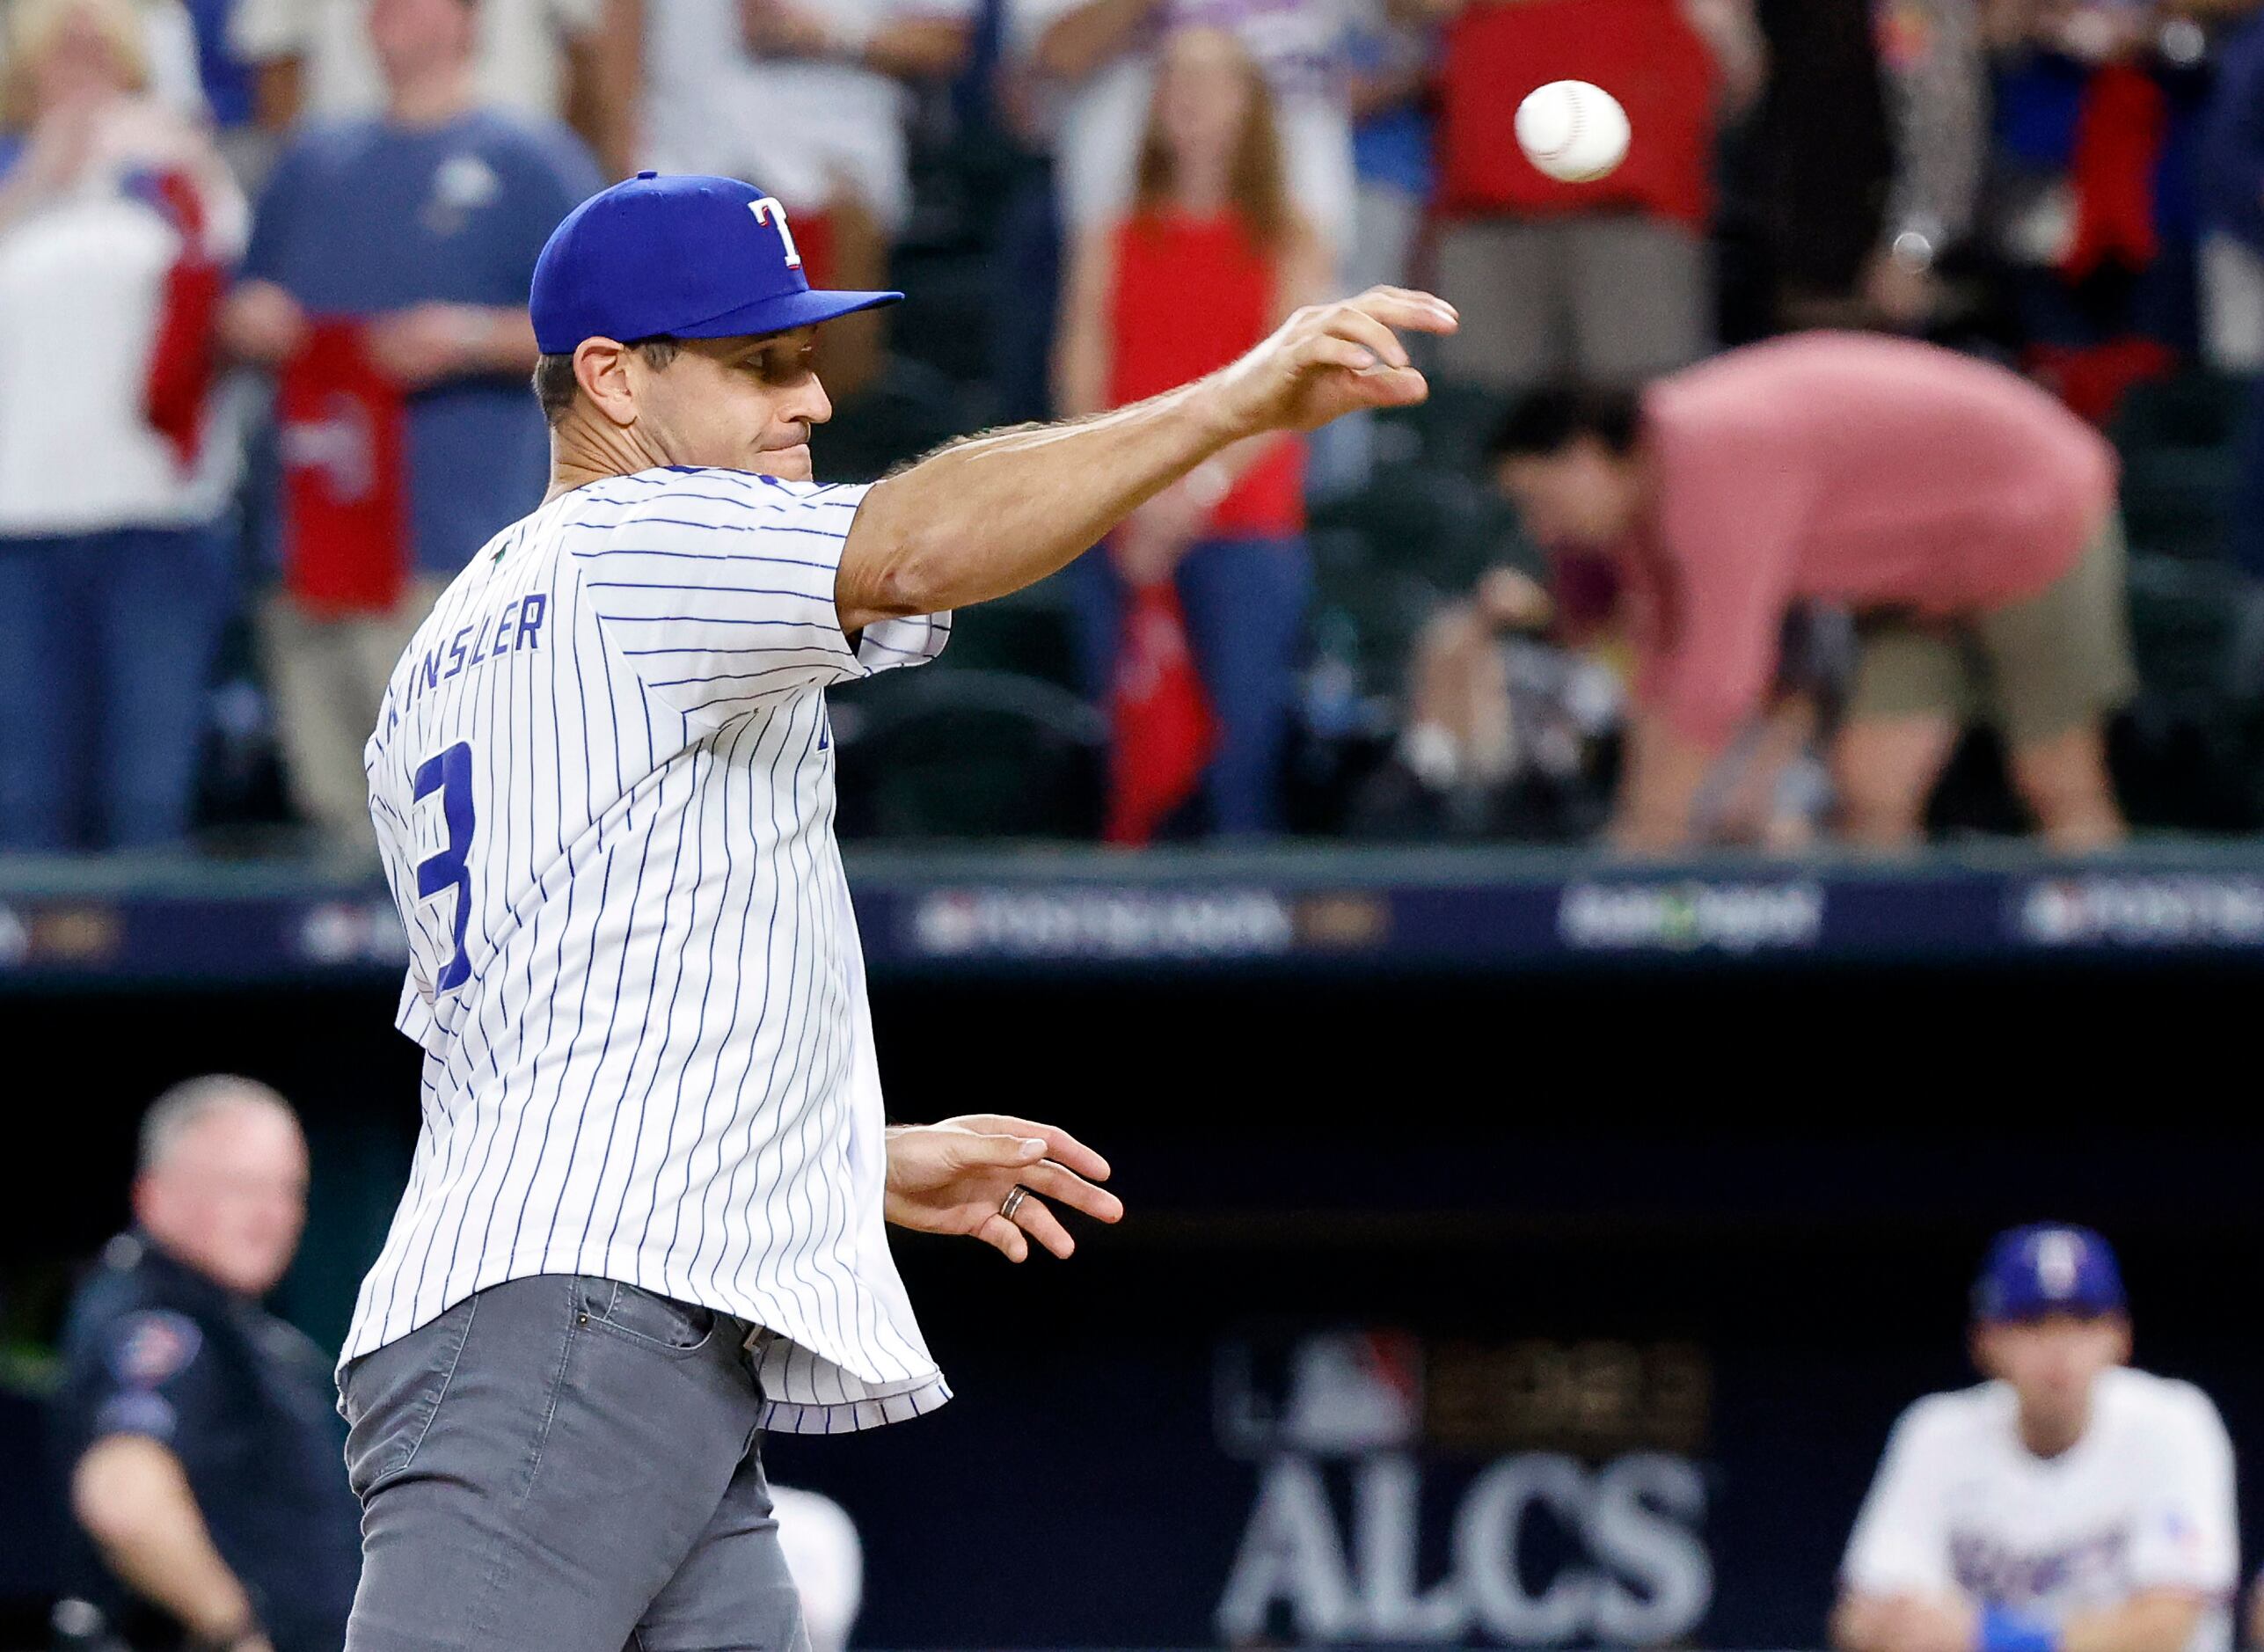 Ex-Rangers star Ian Kinsler wears Israel jersey for ALCS Game 3 first pitch